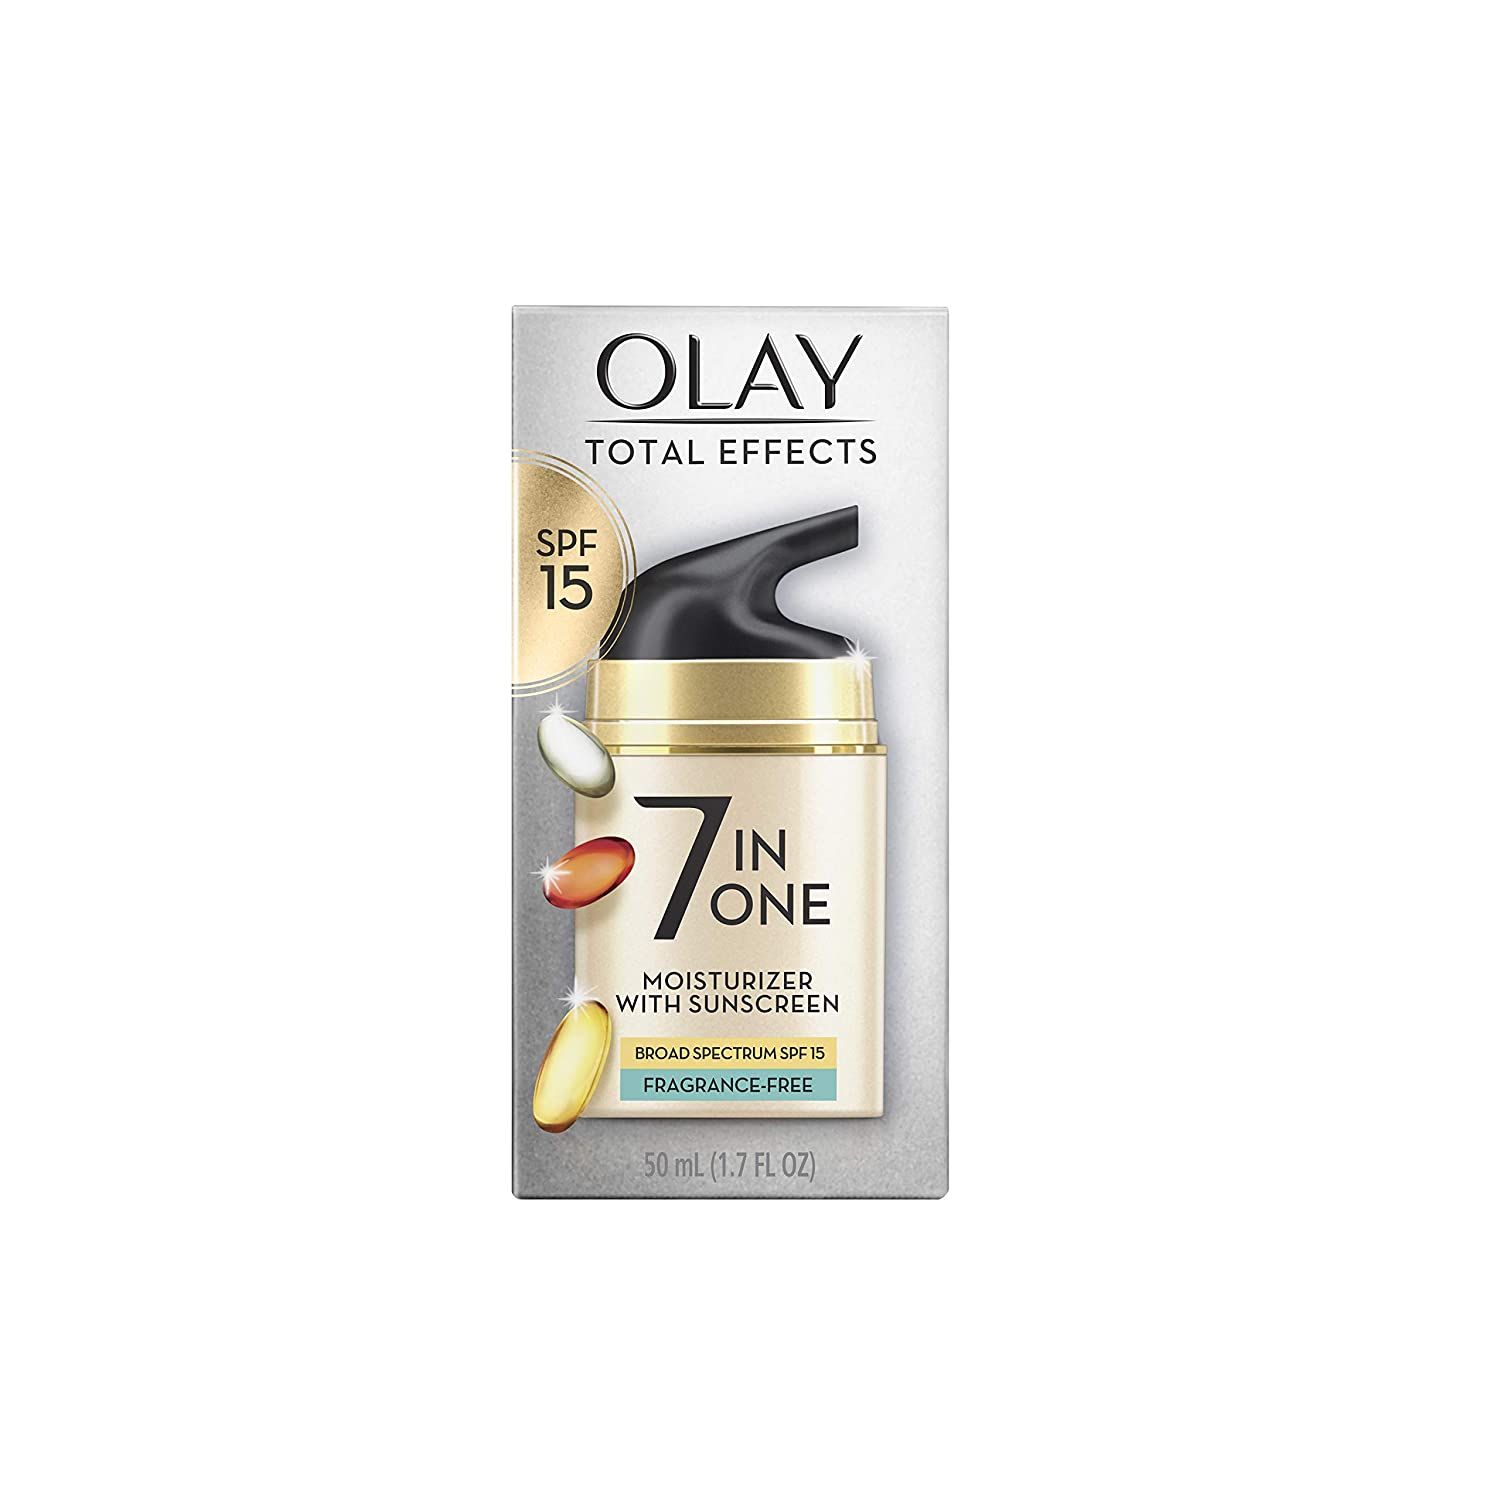 olay-complete-all-day-moisturizer-with-sunscreen-spf-15-review-the